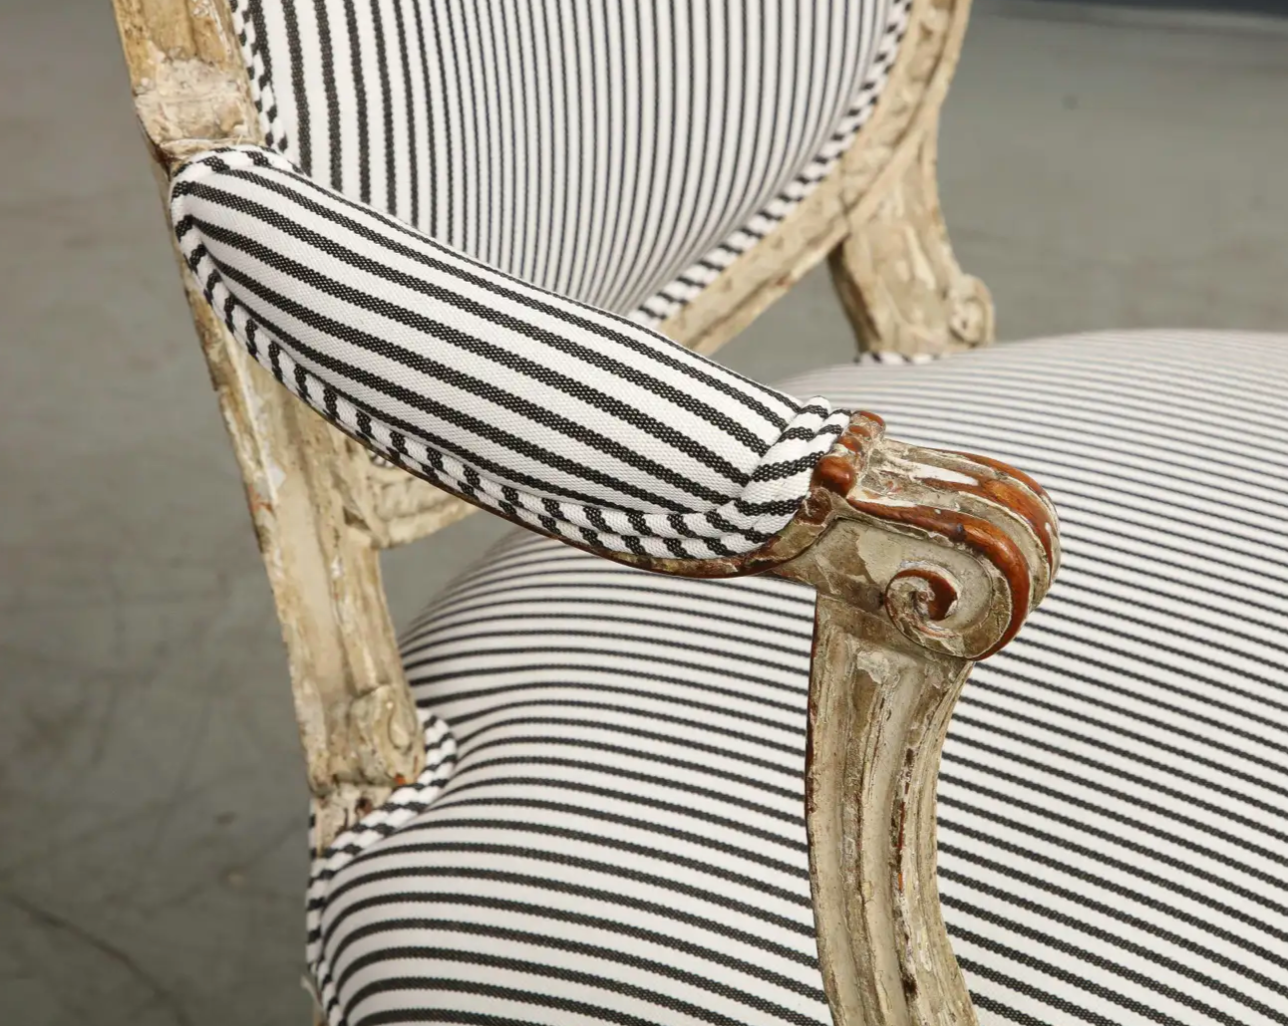 19th Century French Louis XVI Style Fauteuil Chair in Striped Linen Upholstery